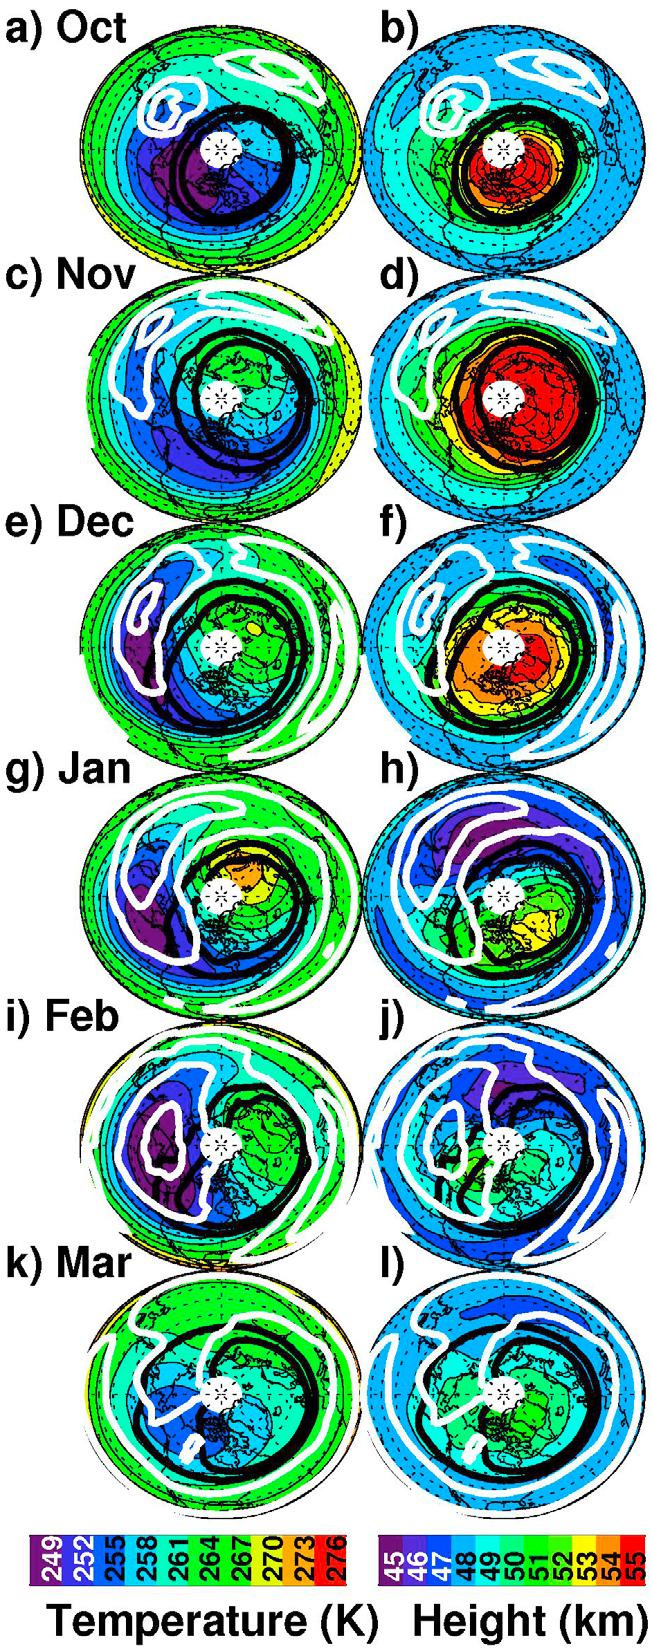 Figure 3. NH polar orthographic projections of monthly mean stratopause (left) temperature and (right) height. Seasons included are 2004/2005, 2006/2007, 2007/2008, 2009/2010, 2010/2011.